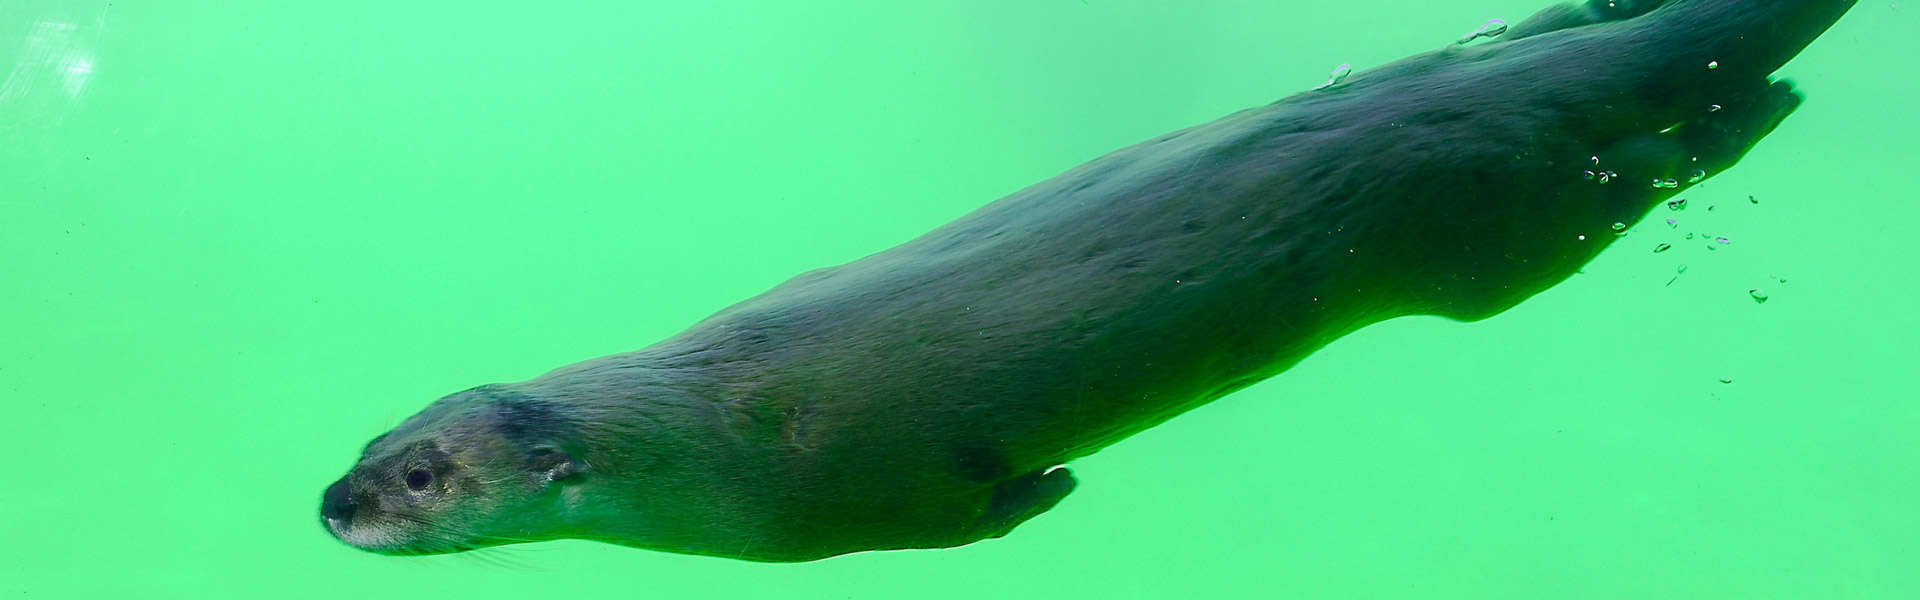 A North American River Otter swimming underwater